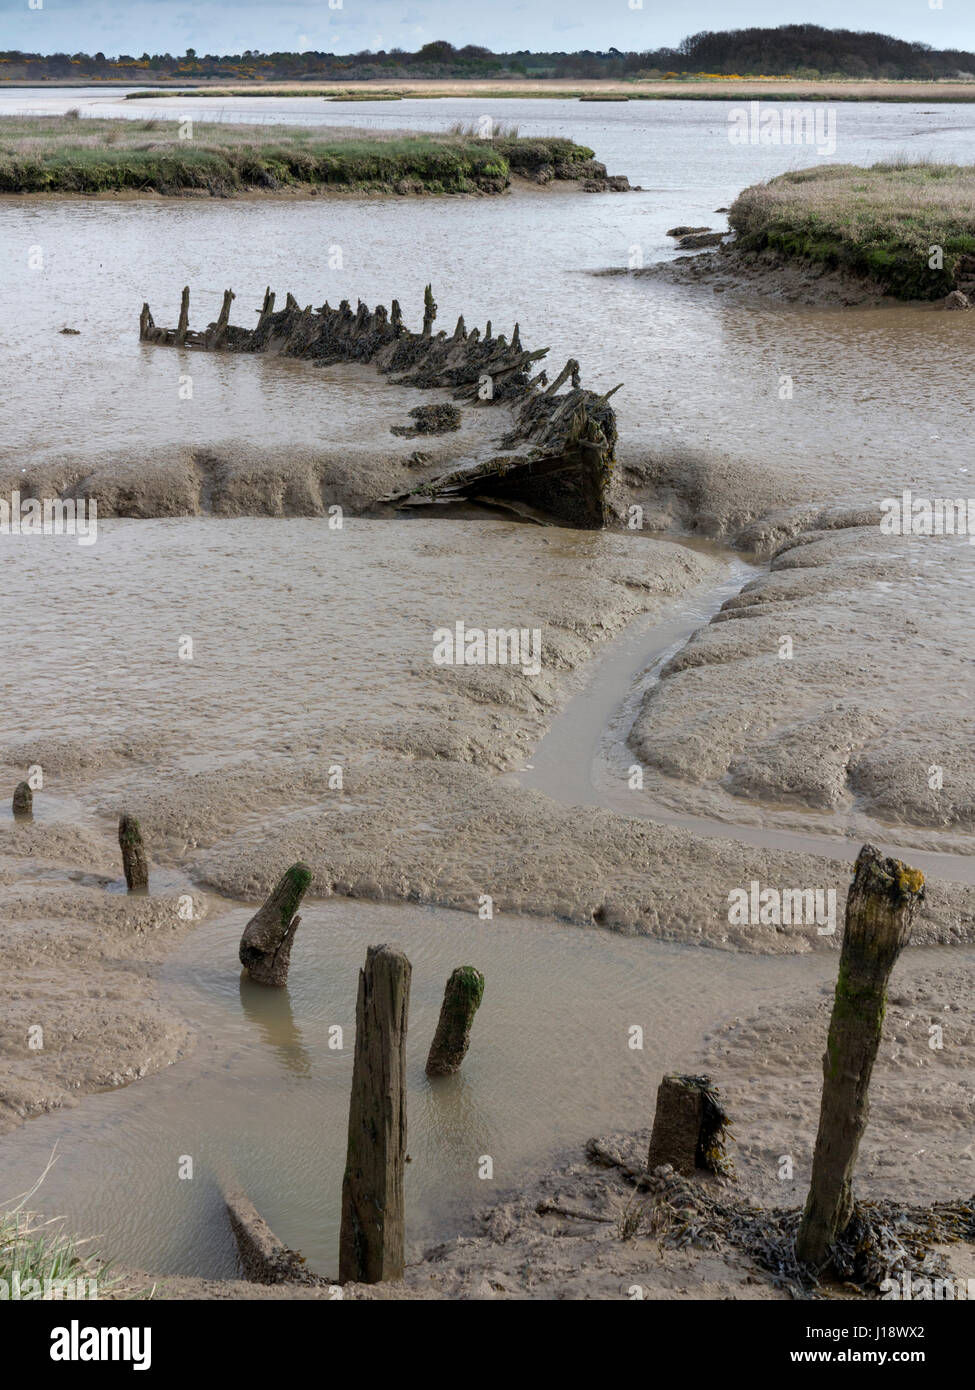 The remains of a wooden ship submerged in the river estuary at Iken marshes Suffolk Stock Photo